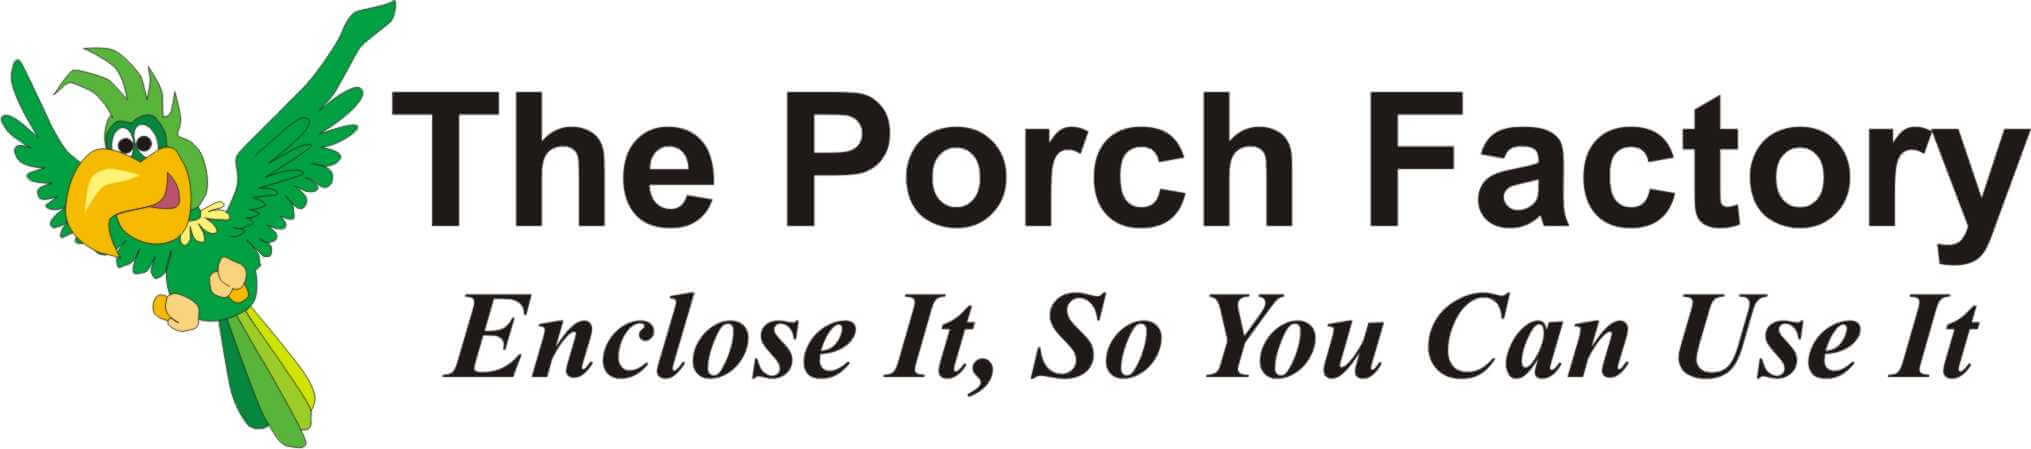 https://growthzonecmsprodeastus.azureedge.net/sites/174/2024/03/The-Porch-Factory-Logo_Full_and_Full_Color-2.jpg